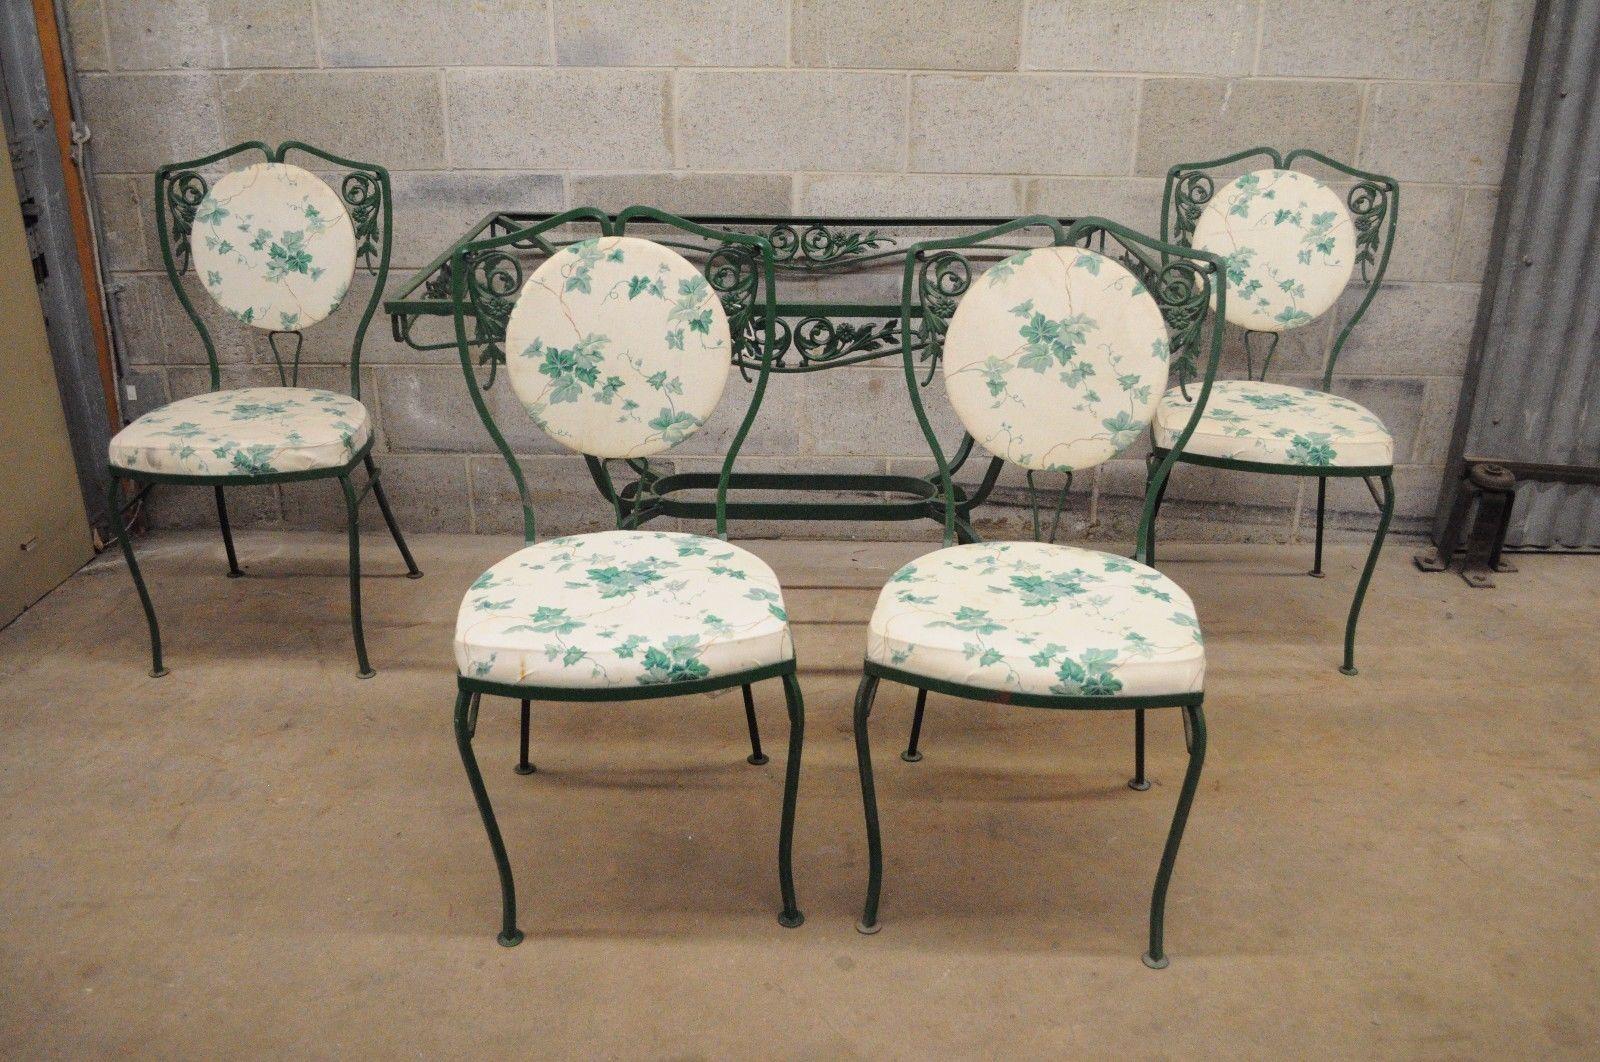 Five-piece vintage wrought iron patio dining set attributed to Salterini - no glass. Item features four chairs, rectangular table (no glass), upholstered back and seats, floral vine pattern, green painted finish, shapely legs, high quality iron